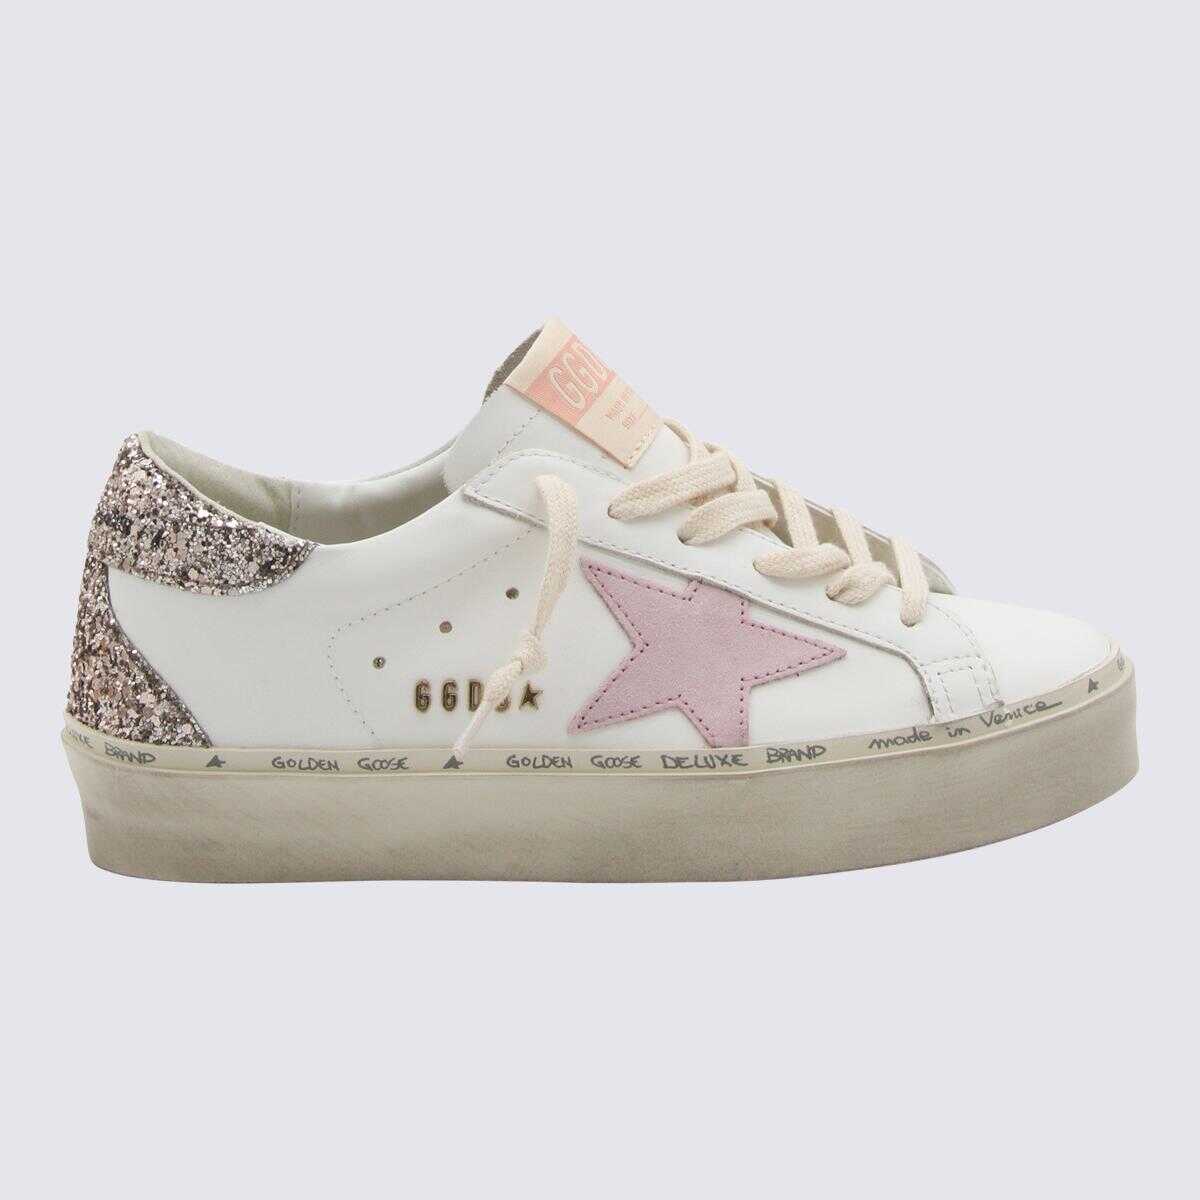 Golden Goose GOLDEN GOOSE WHITE AND ANTIQUE PINK LEATHER HI STAR GLITTER SNEAKERS WHITE/ANTIQUE PINK/CINDER